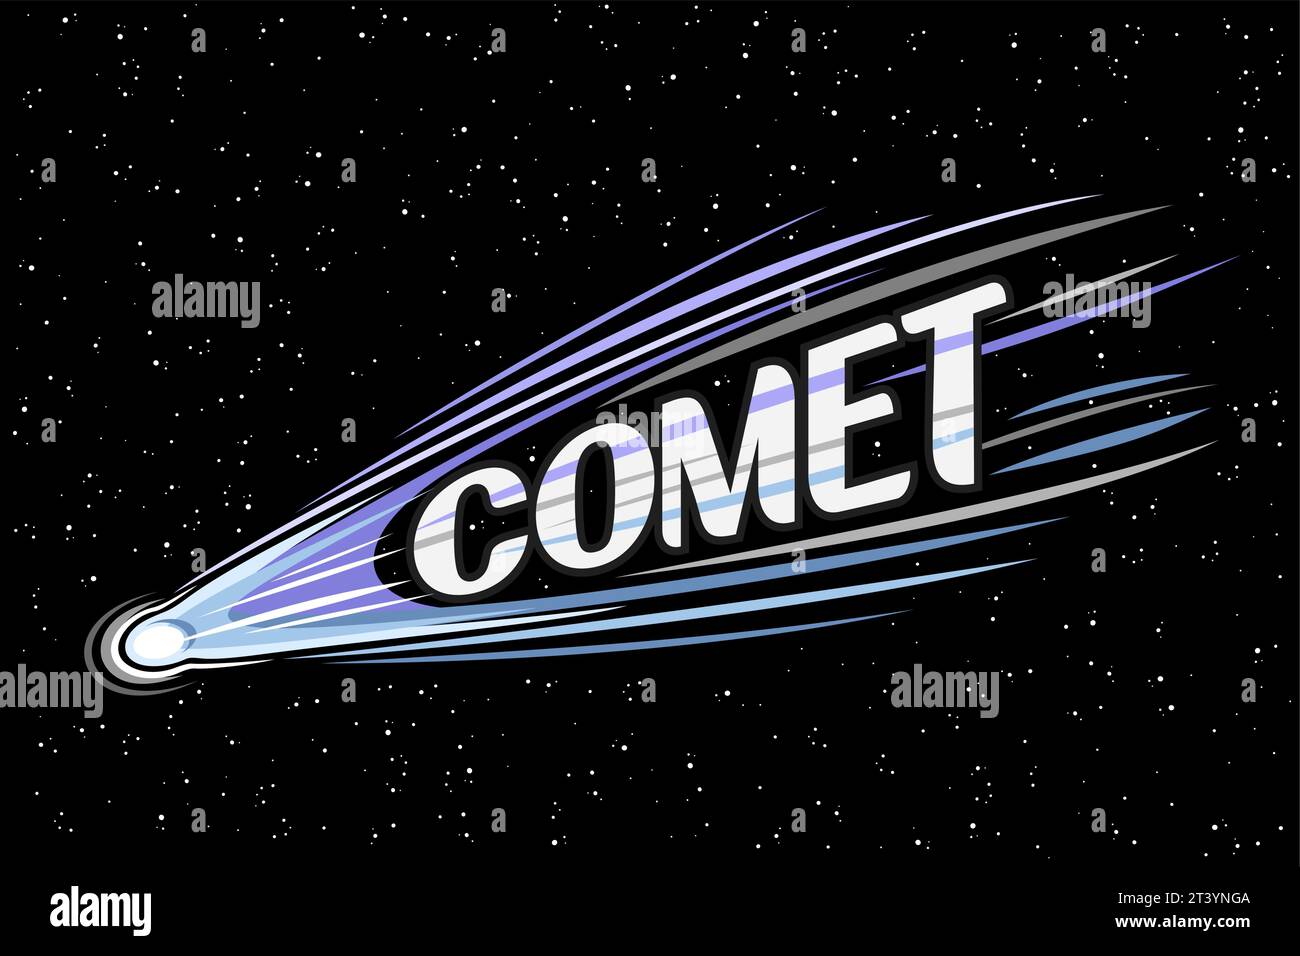 Vector illustration of Comet, horizontal astronomical poster with shooting purple ice comet, line art cosmo print with futuristic meteor in deep space Stock Vector